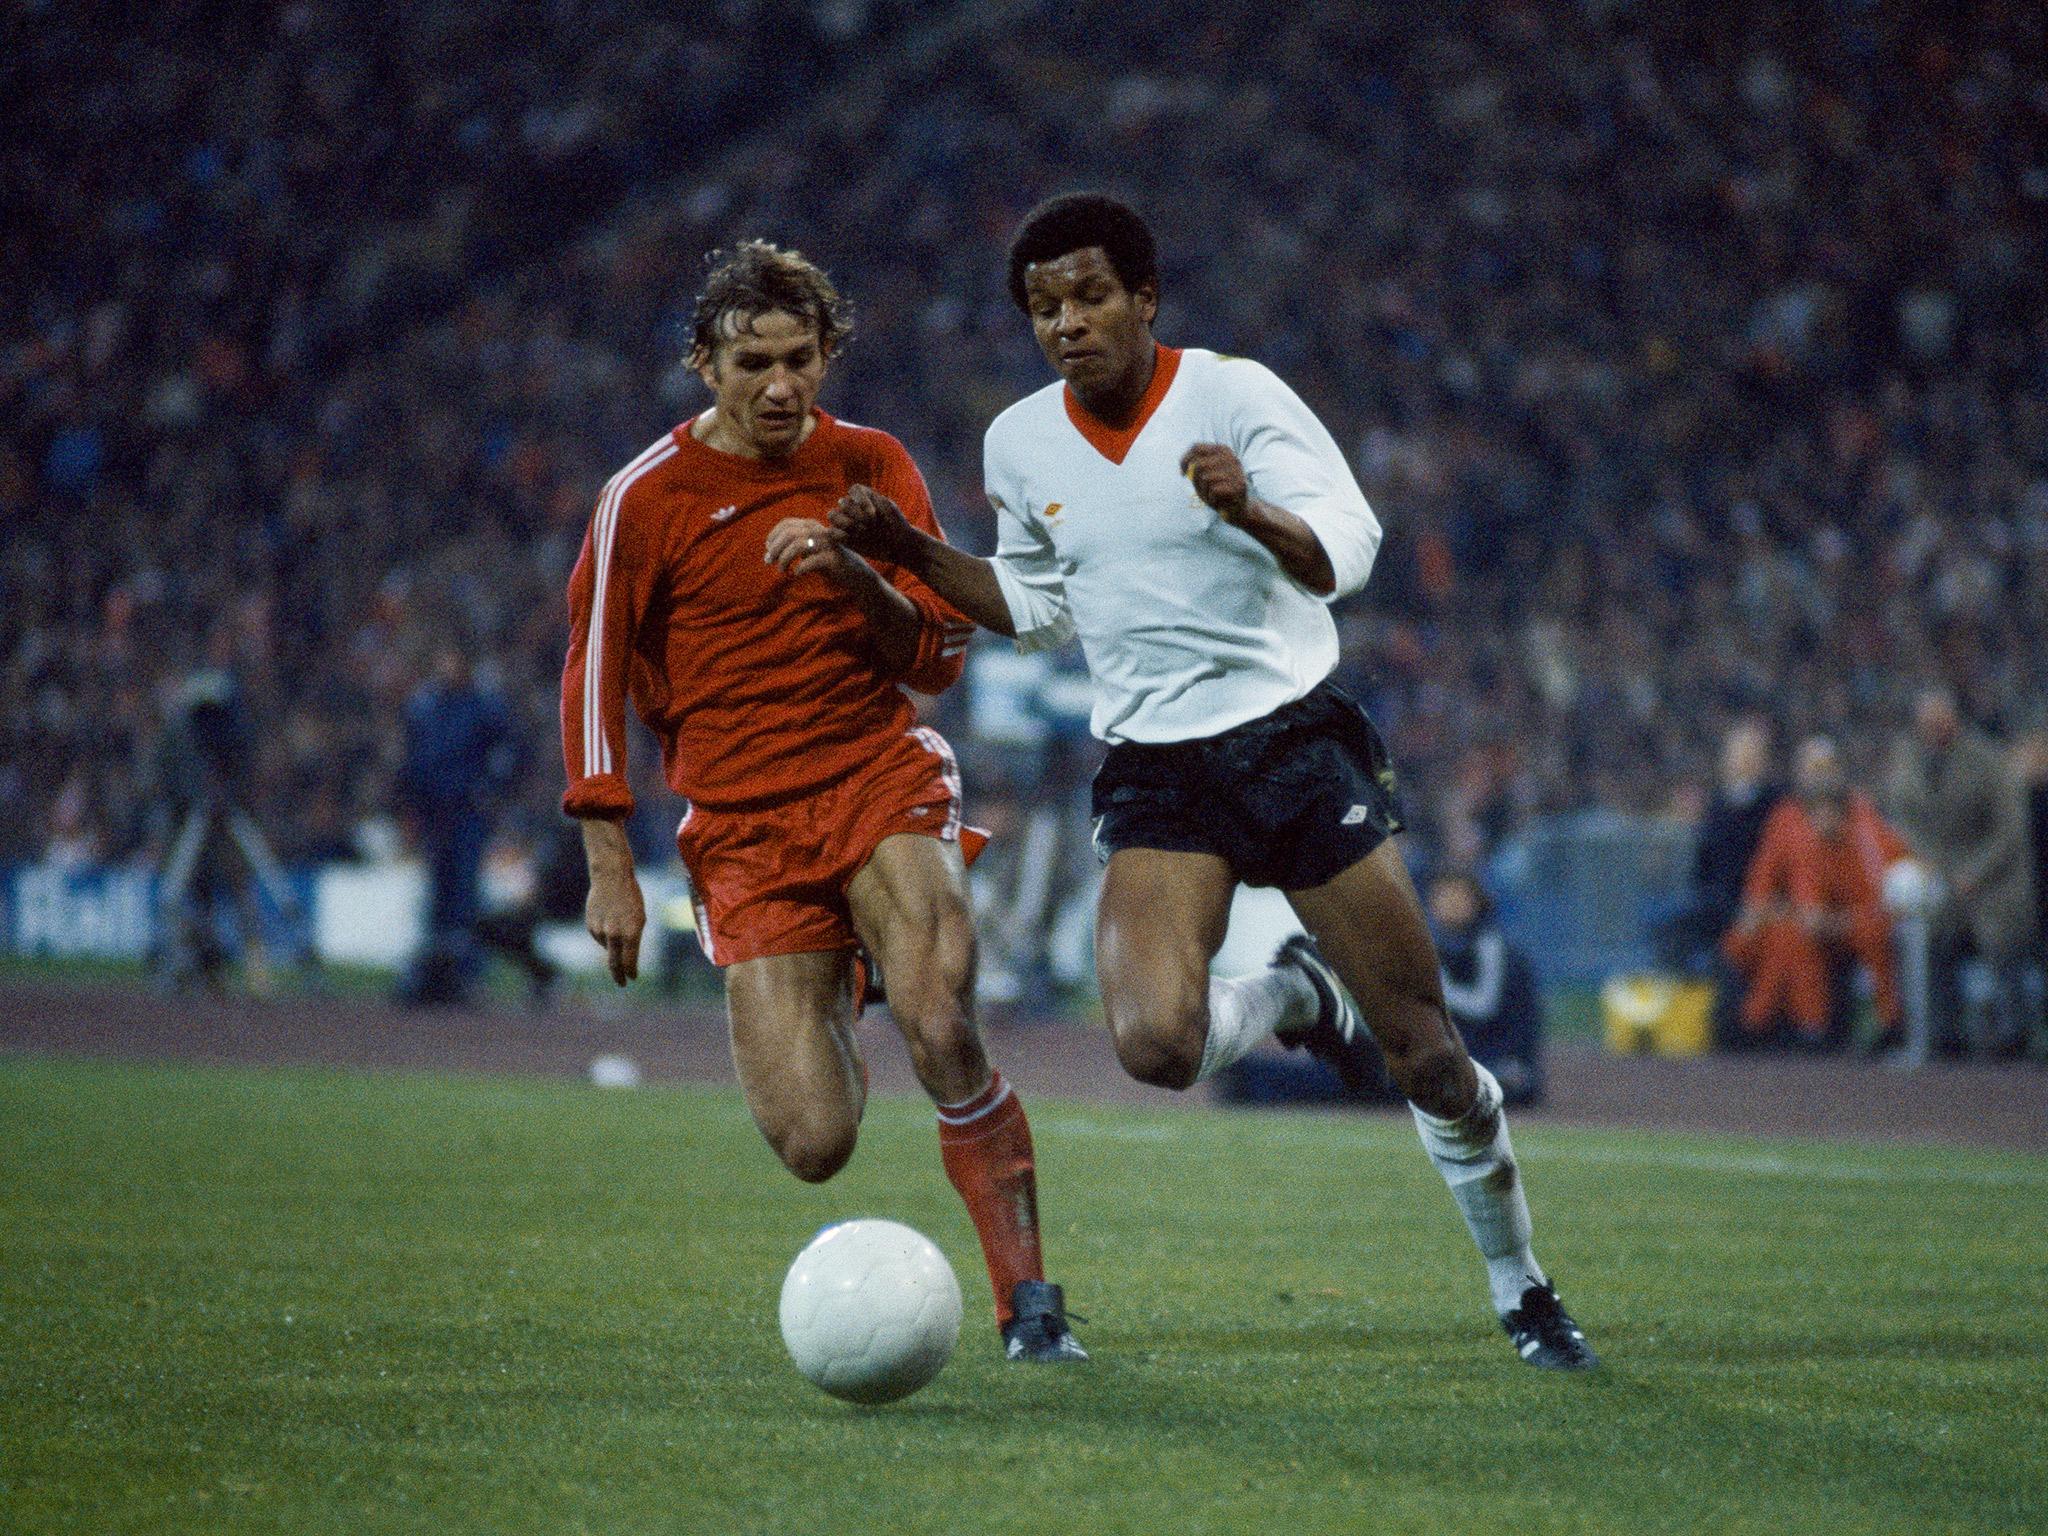 Howard Gayle storms past Wolfgang Dremmler in the second-leg of Liverpool's semi-final clash against Bayern Munich in the European Cup, April 1981 (Getty)